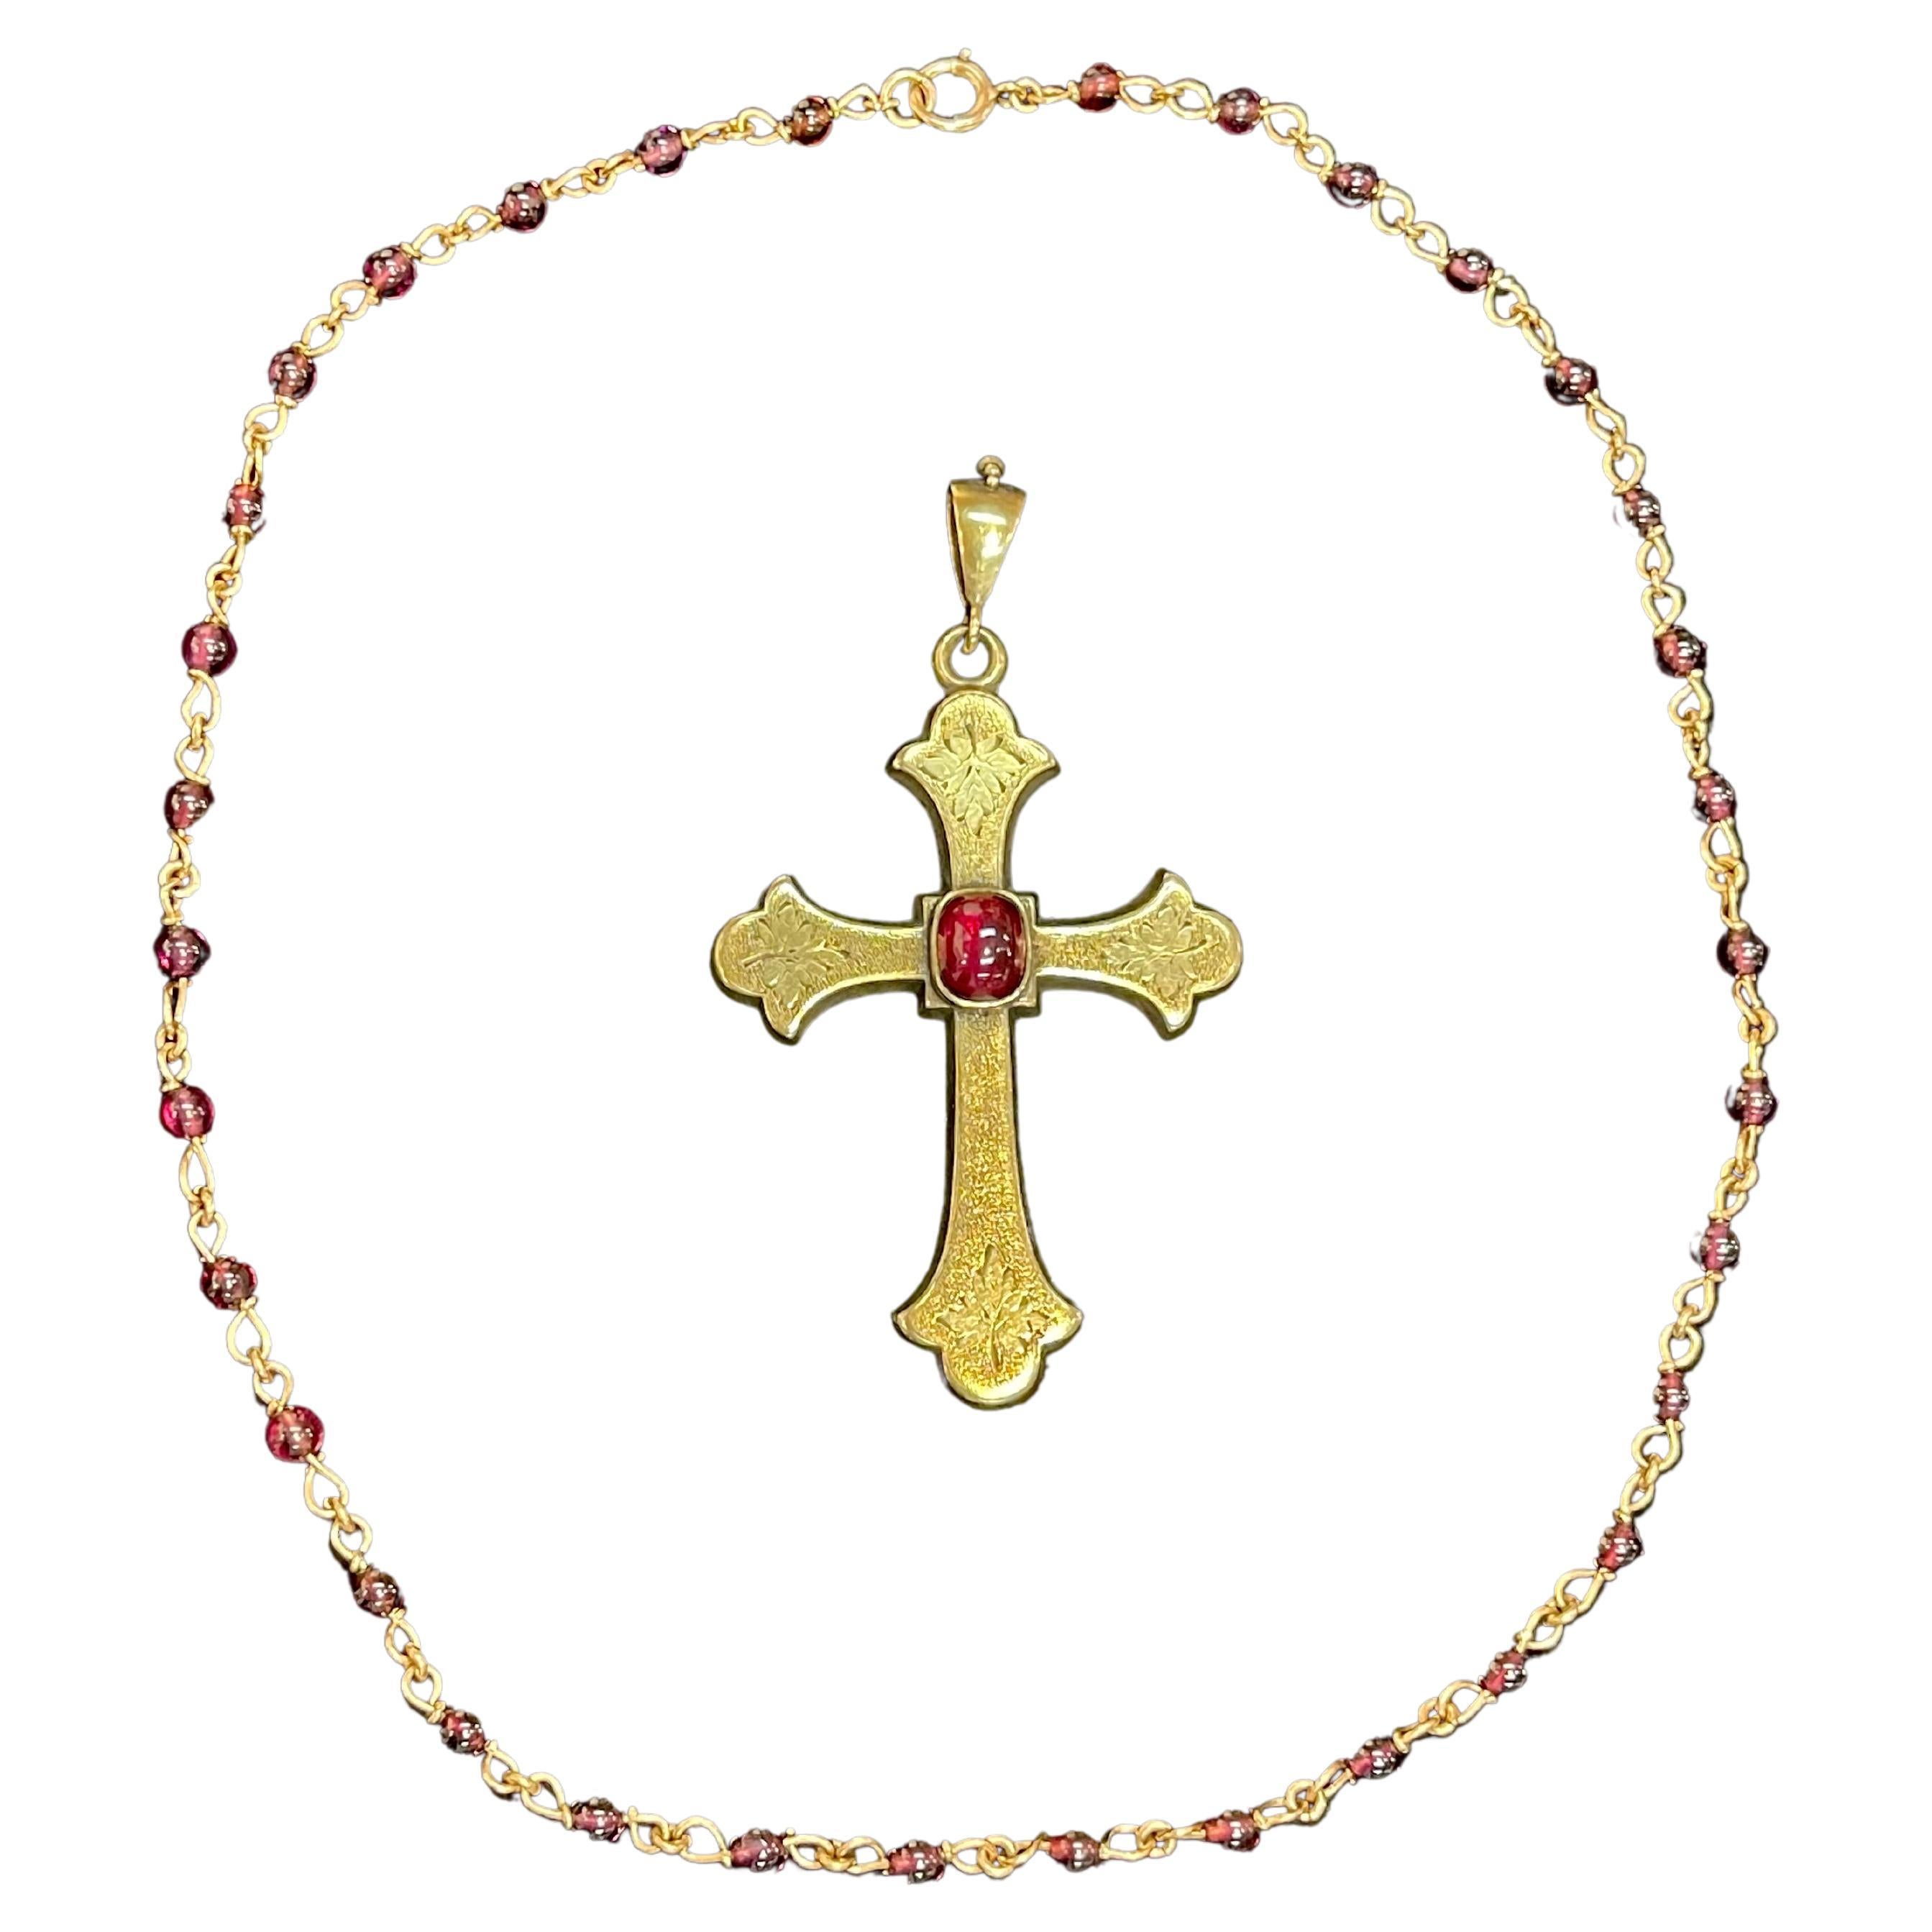 Antique Gold and Garnet Vintage Statement Cross Pendant and Necklace